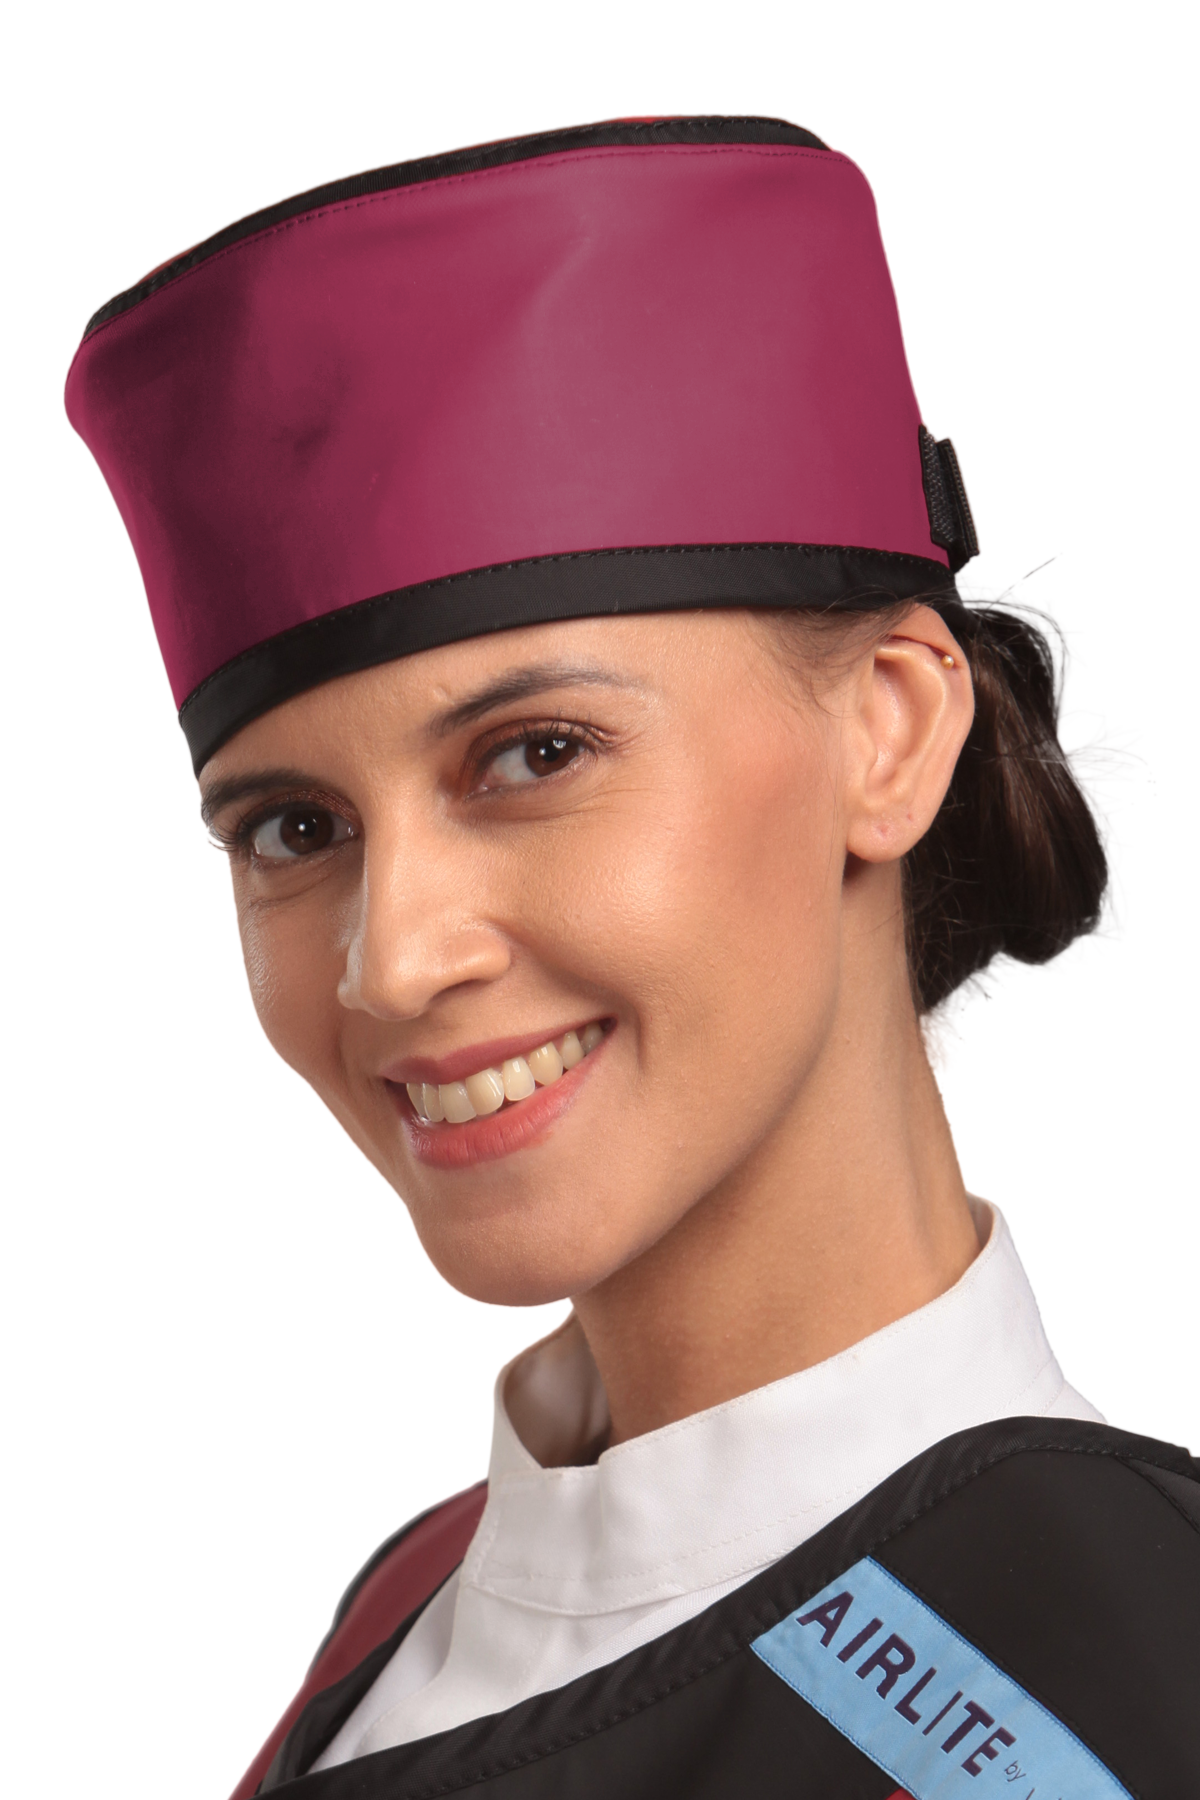 Up-close left-side frontal view of a female model wearing a radiation protection head shield. The head shield is Bordeaux red with black-colored lines around the lower and upper edges.